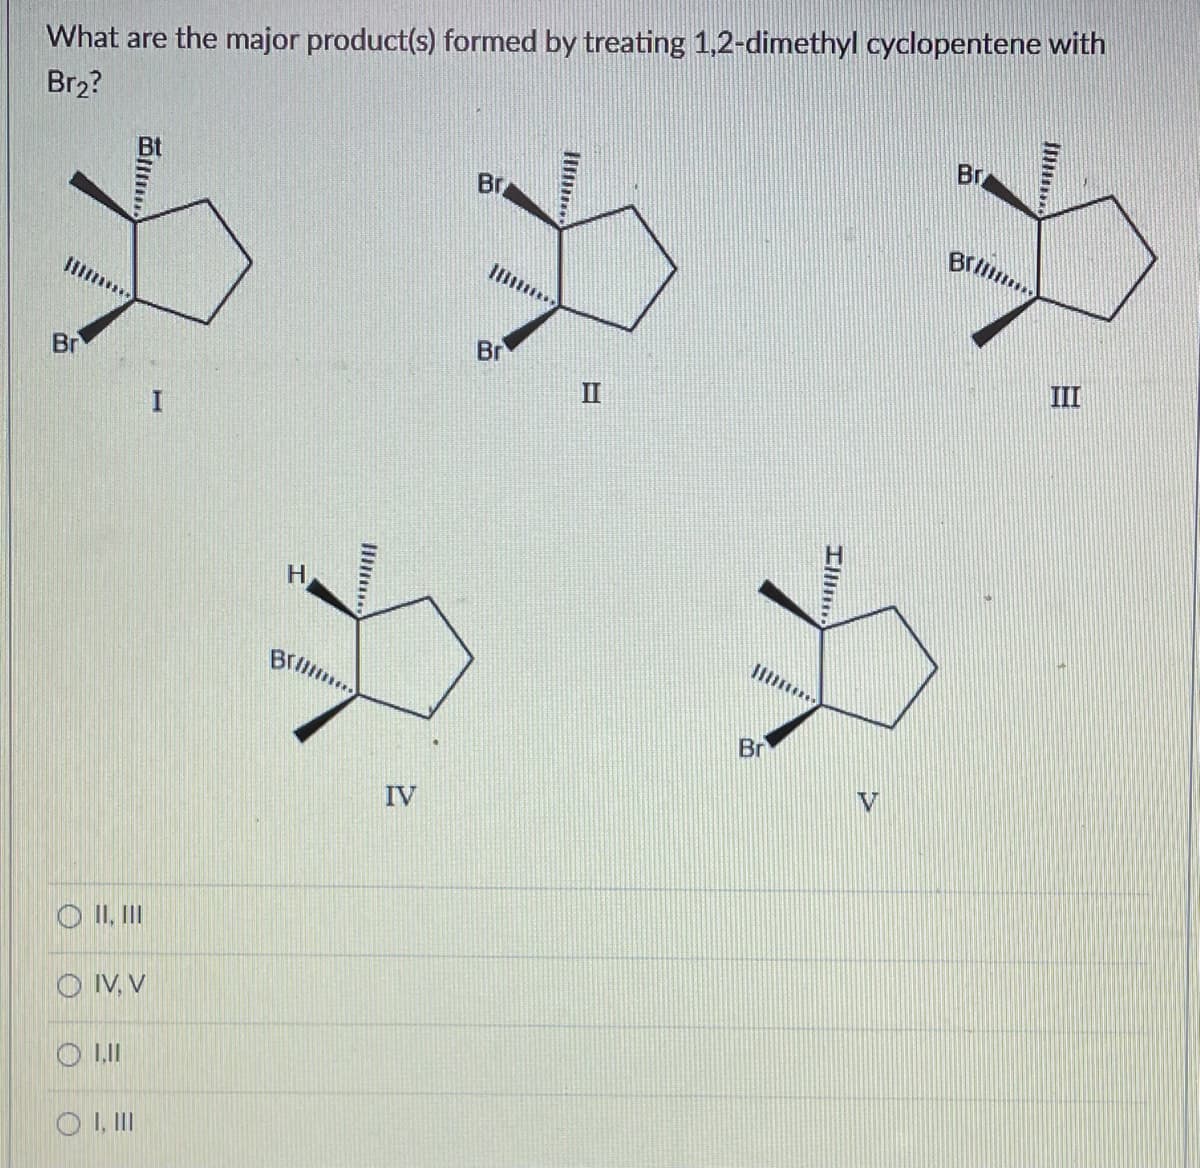 What are the major product(s) formed by treating 1,2-dimethyl cyclopentene with
Br₂?
Br
OII, III
O IV, V
OL.II
OI, III
H
Brillima
IV
Br
Br
II
Ill
A
Br
V
Br
Bril...
III